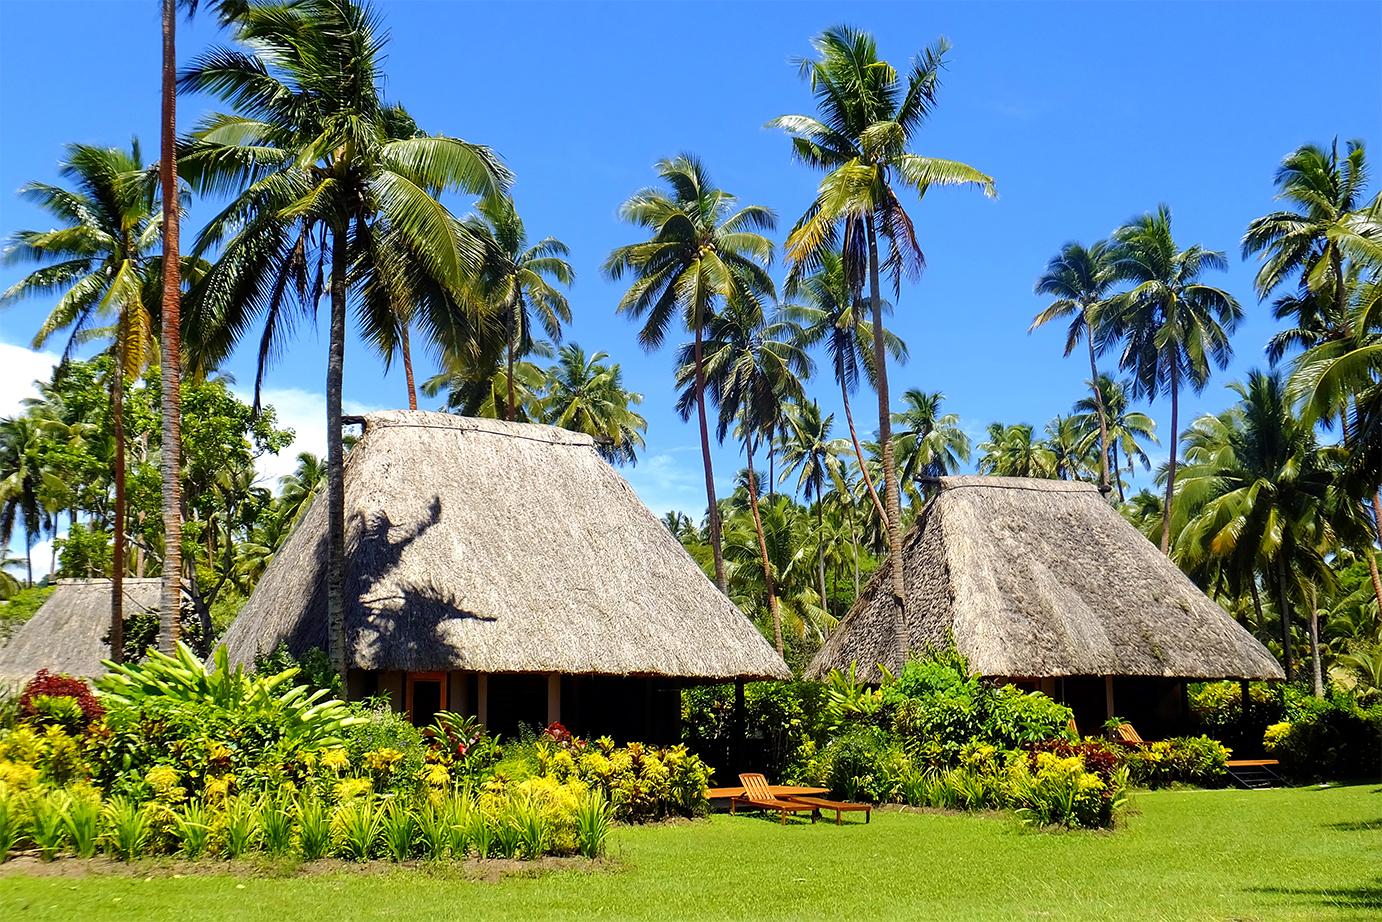 Bungalow Fiji vacation packages - Liberty Travel